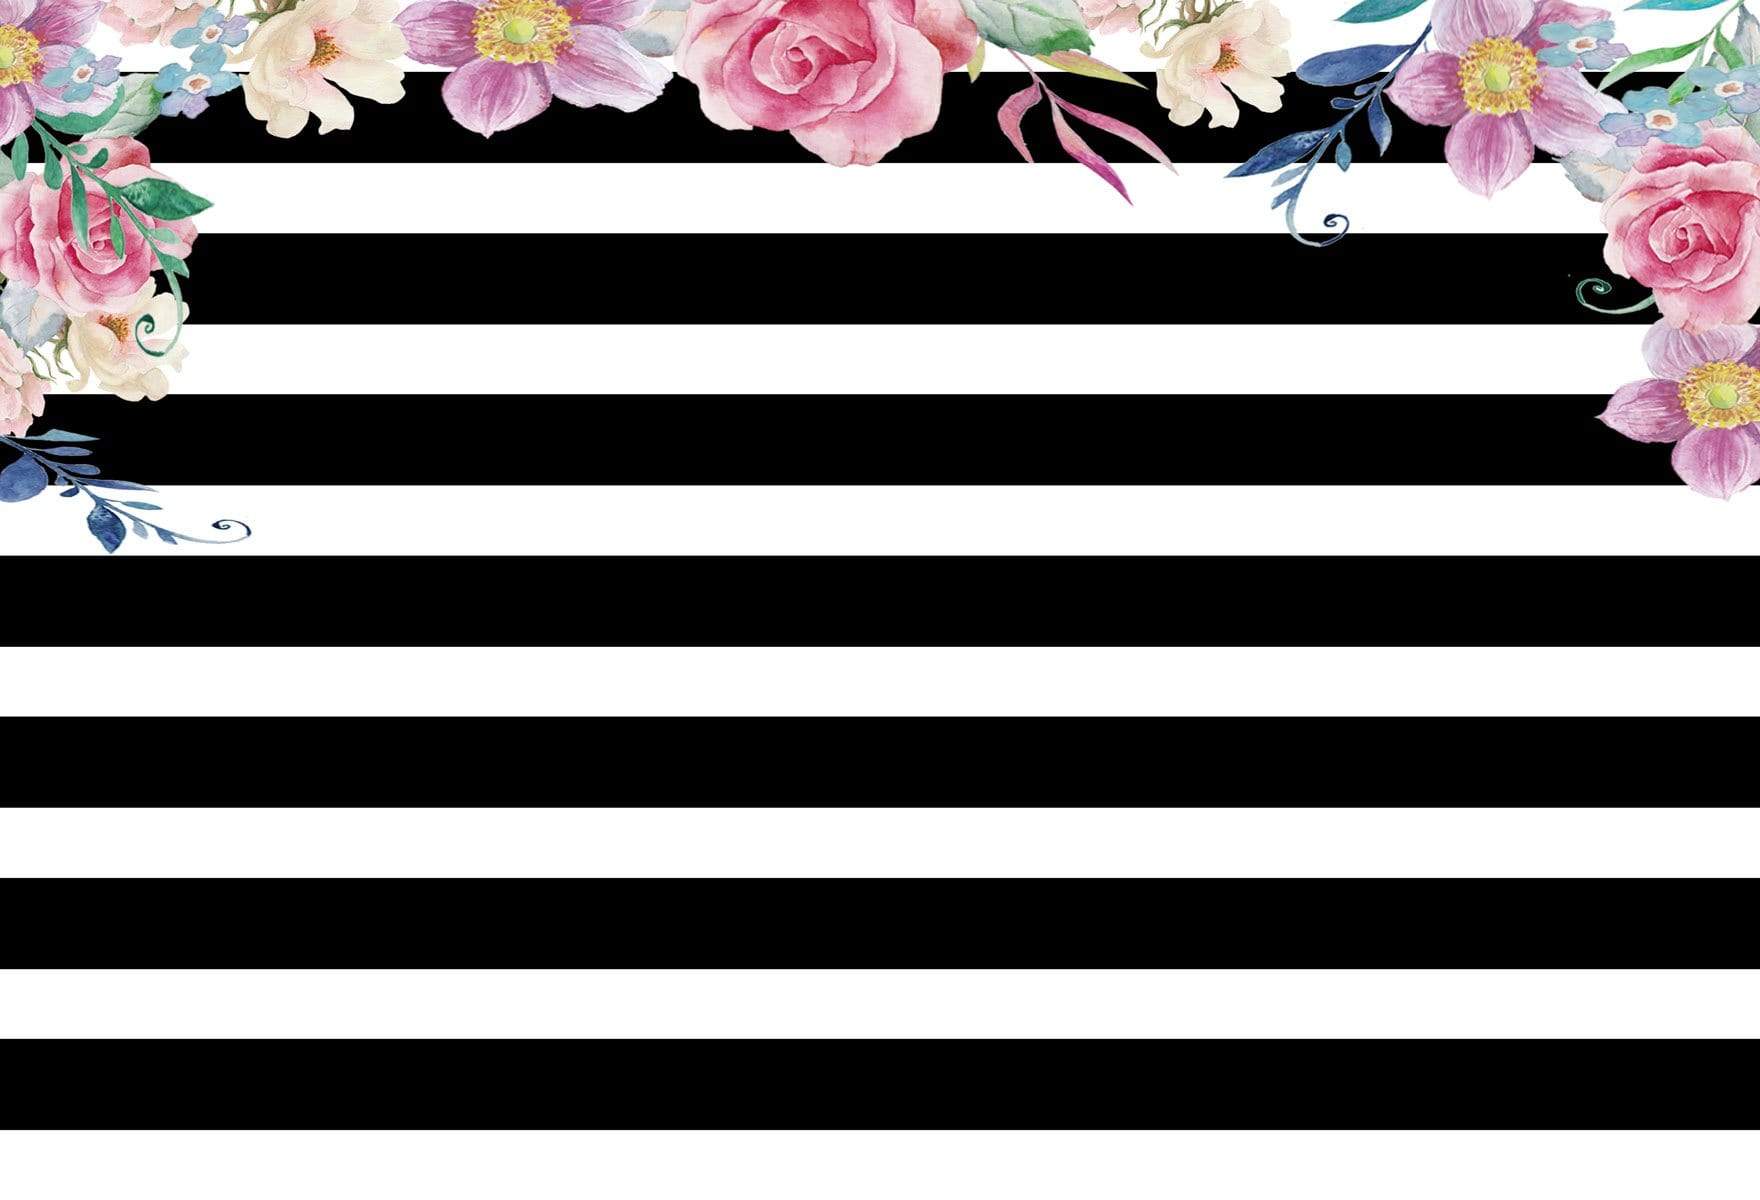 Kate Spade Backdrop Wedding Black and White Stripes Backdrop Flowers Birthday for Parties